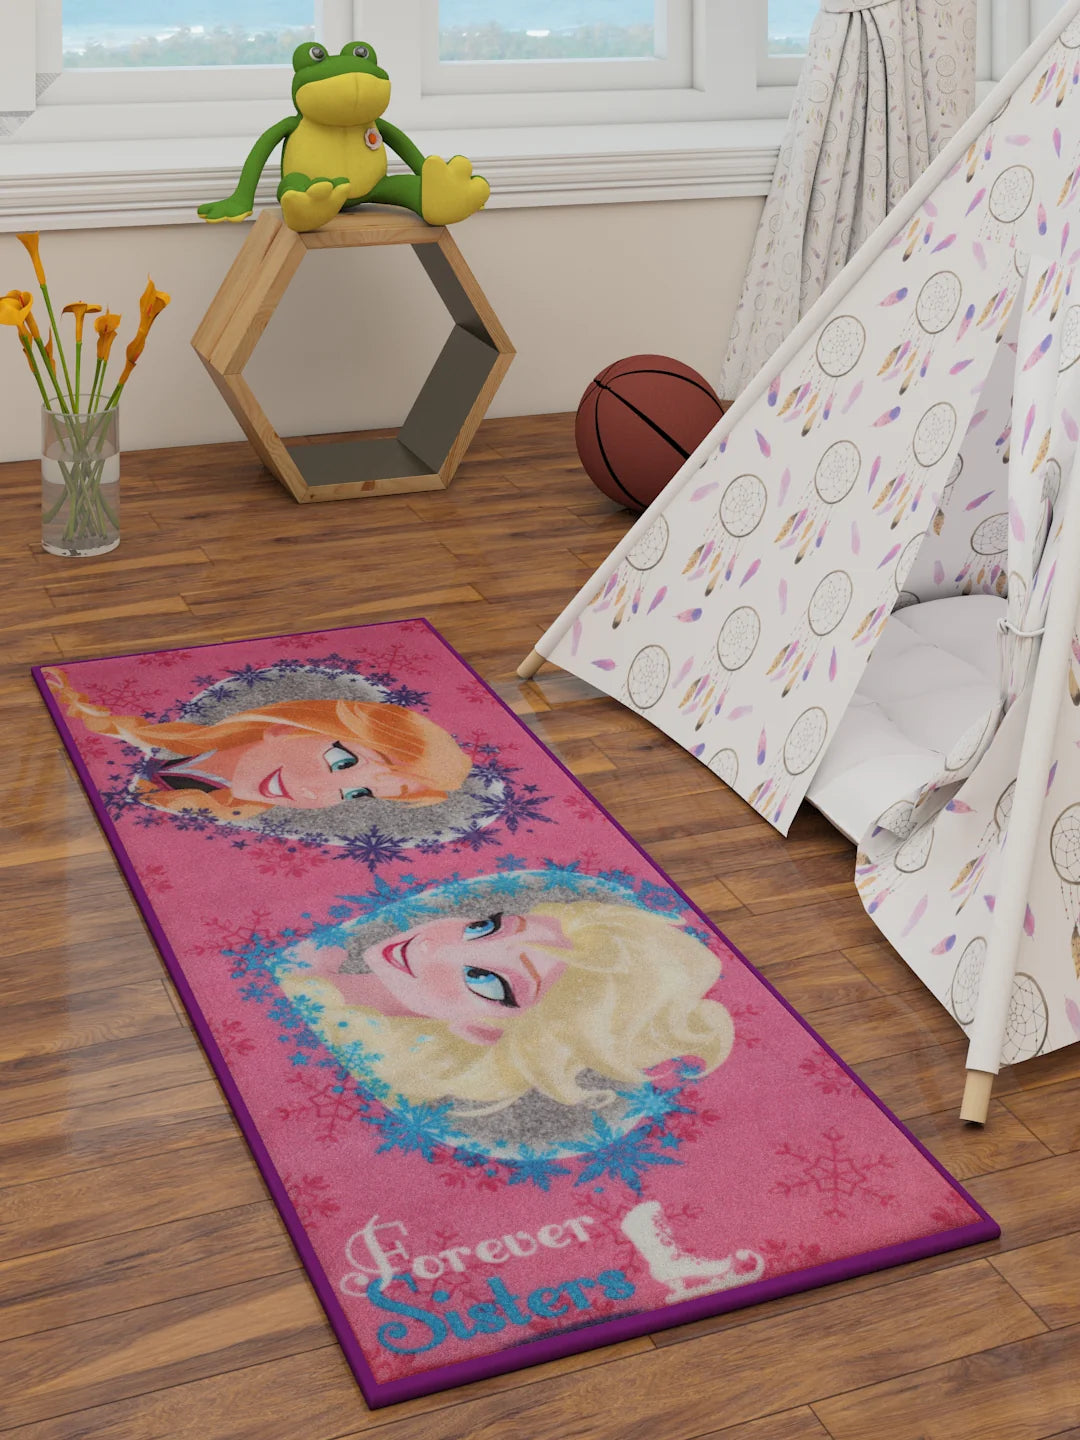 Dive into the Magical World with Disney's Frozen Forever Sisters Runner Carpet